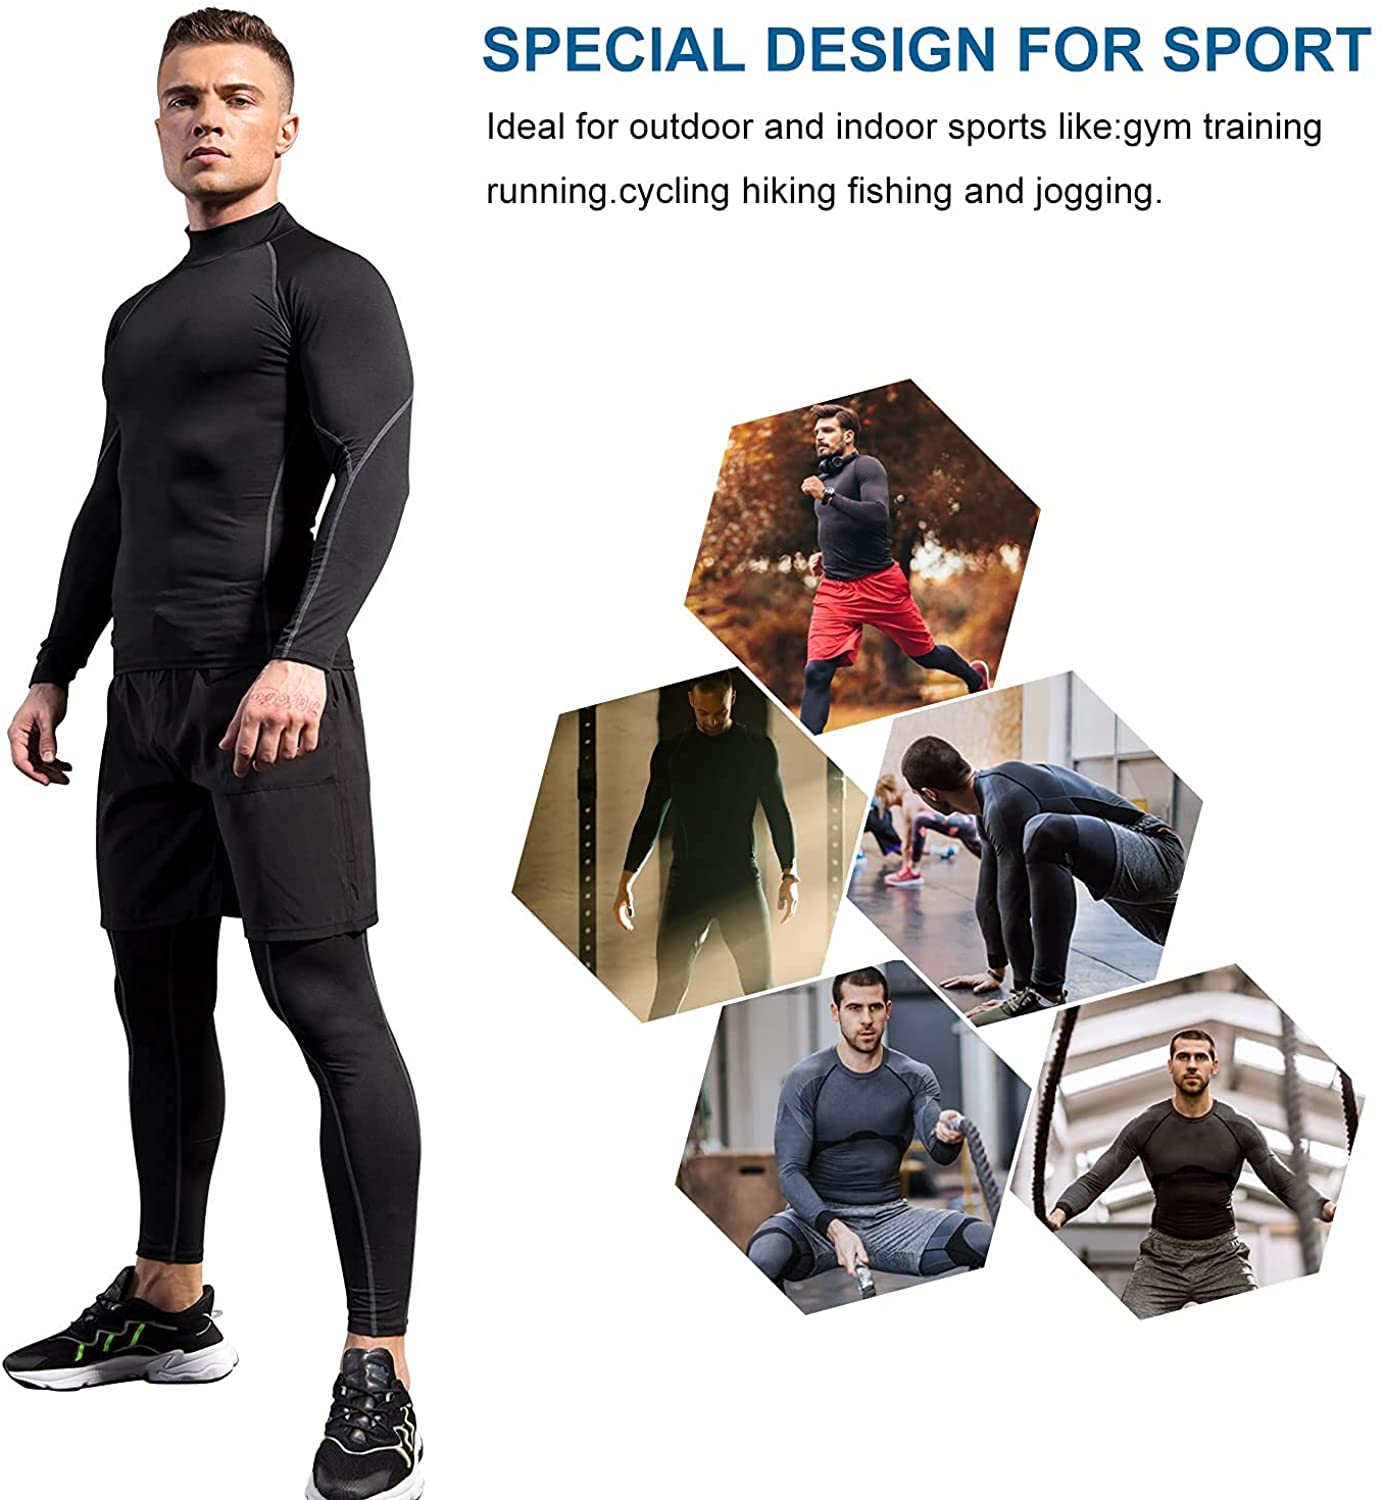 2 Pack Men Thermal Turtle Mock Neck Shirts Male Compression Long Sleeve Tops LANBAOSI